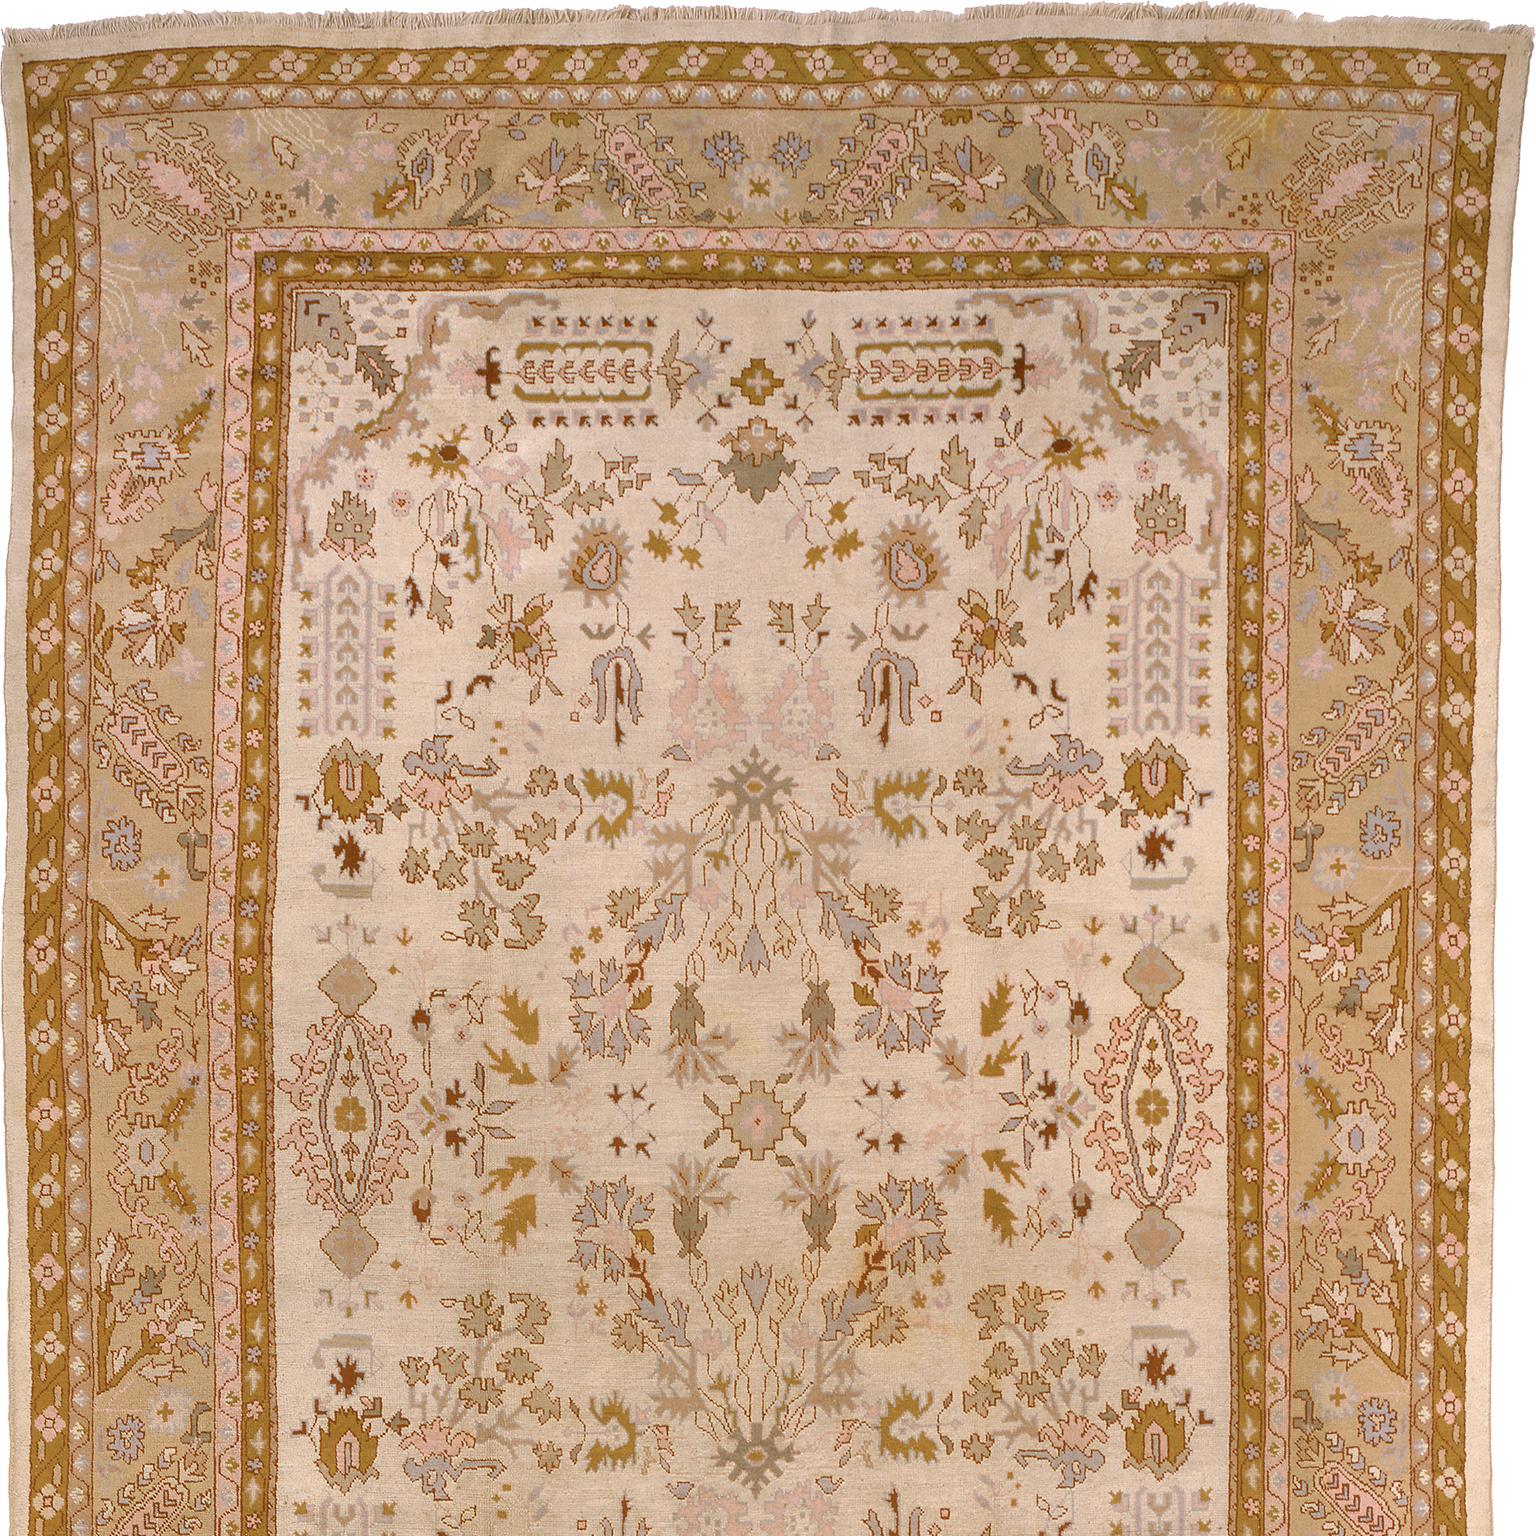 Late 19th Century Turkish Oushak Rug In Good Condition For Sale In New York, NY